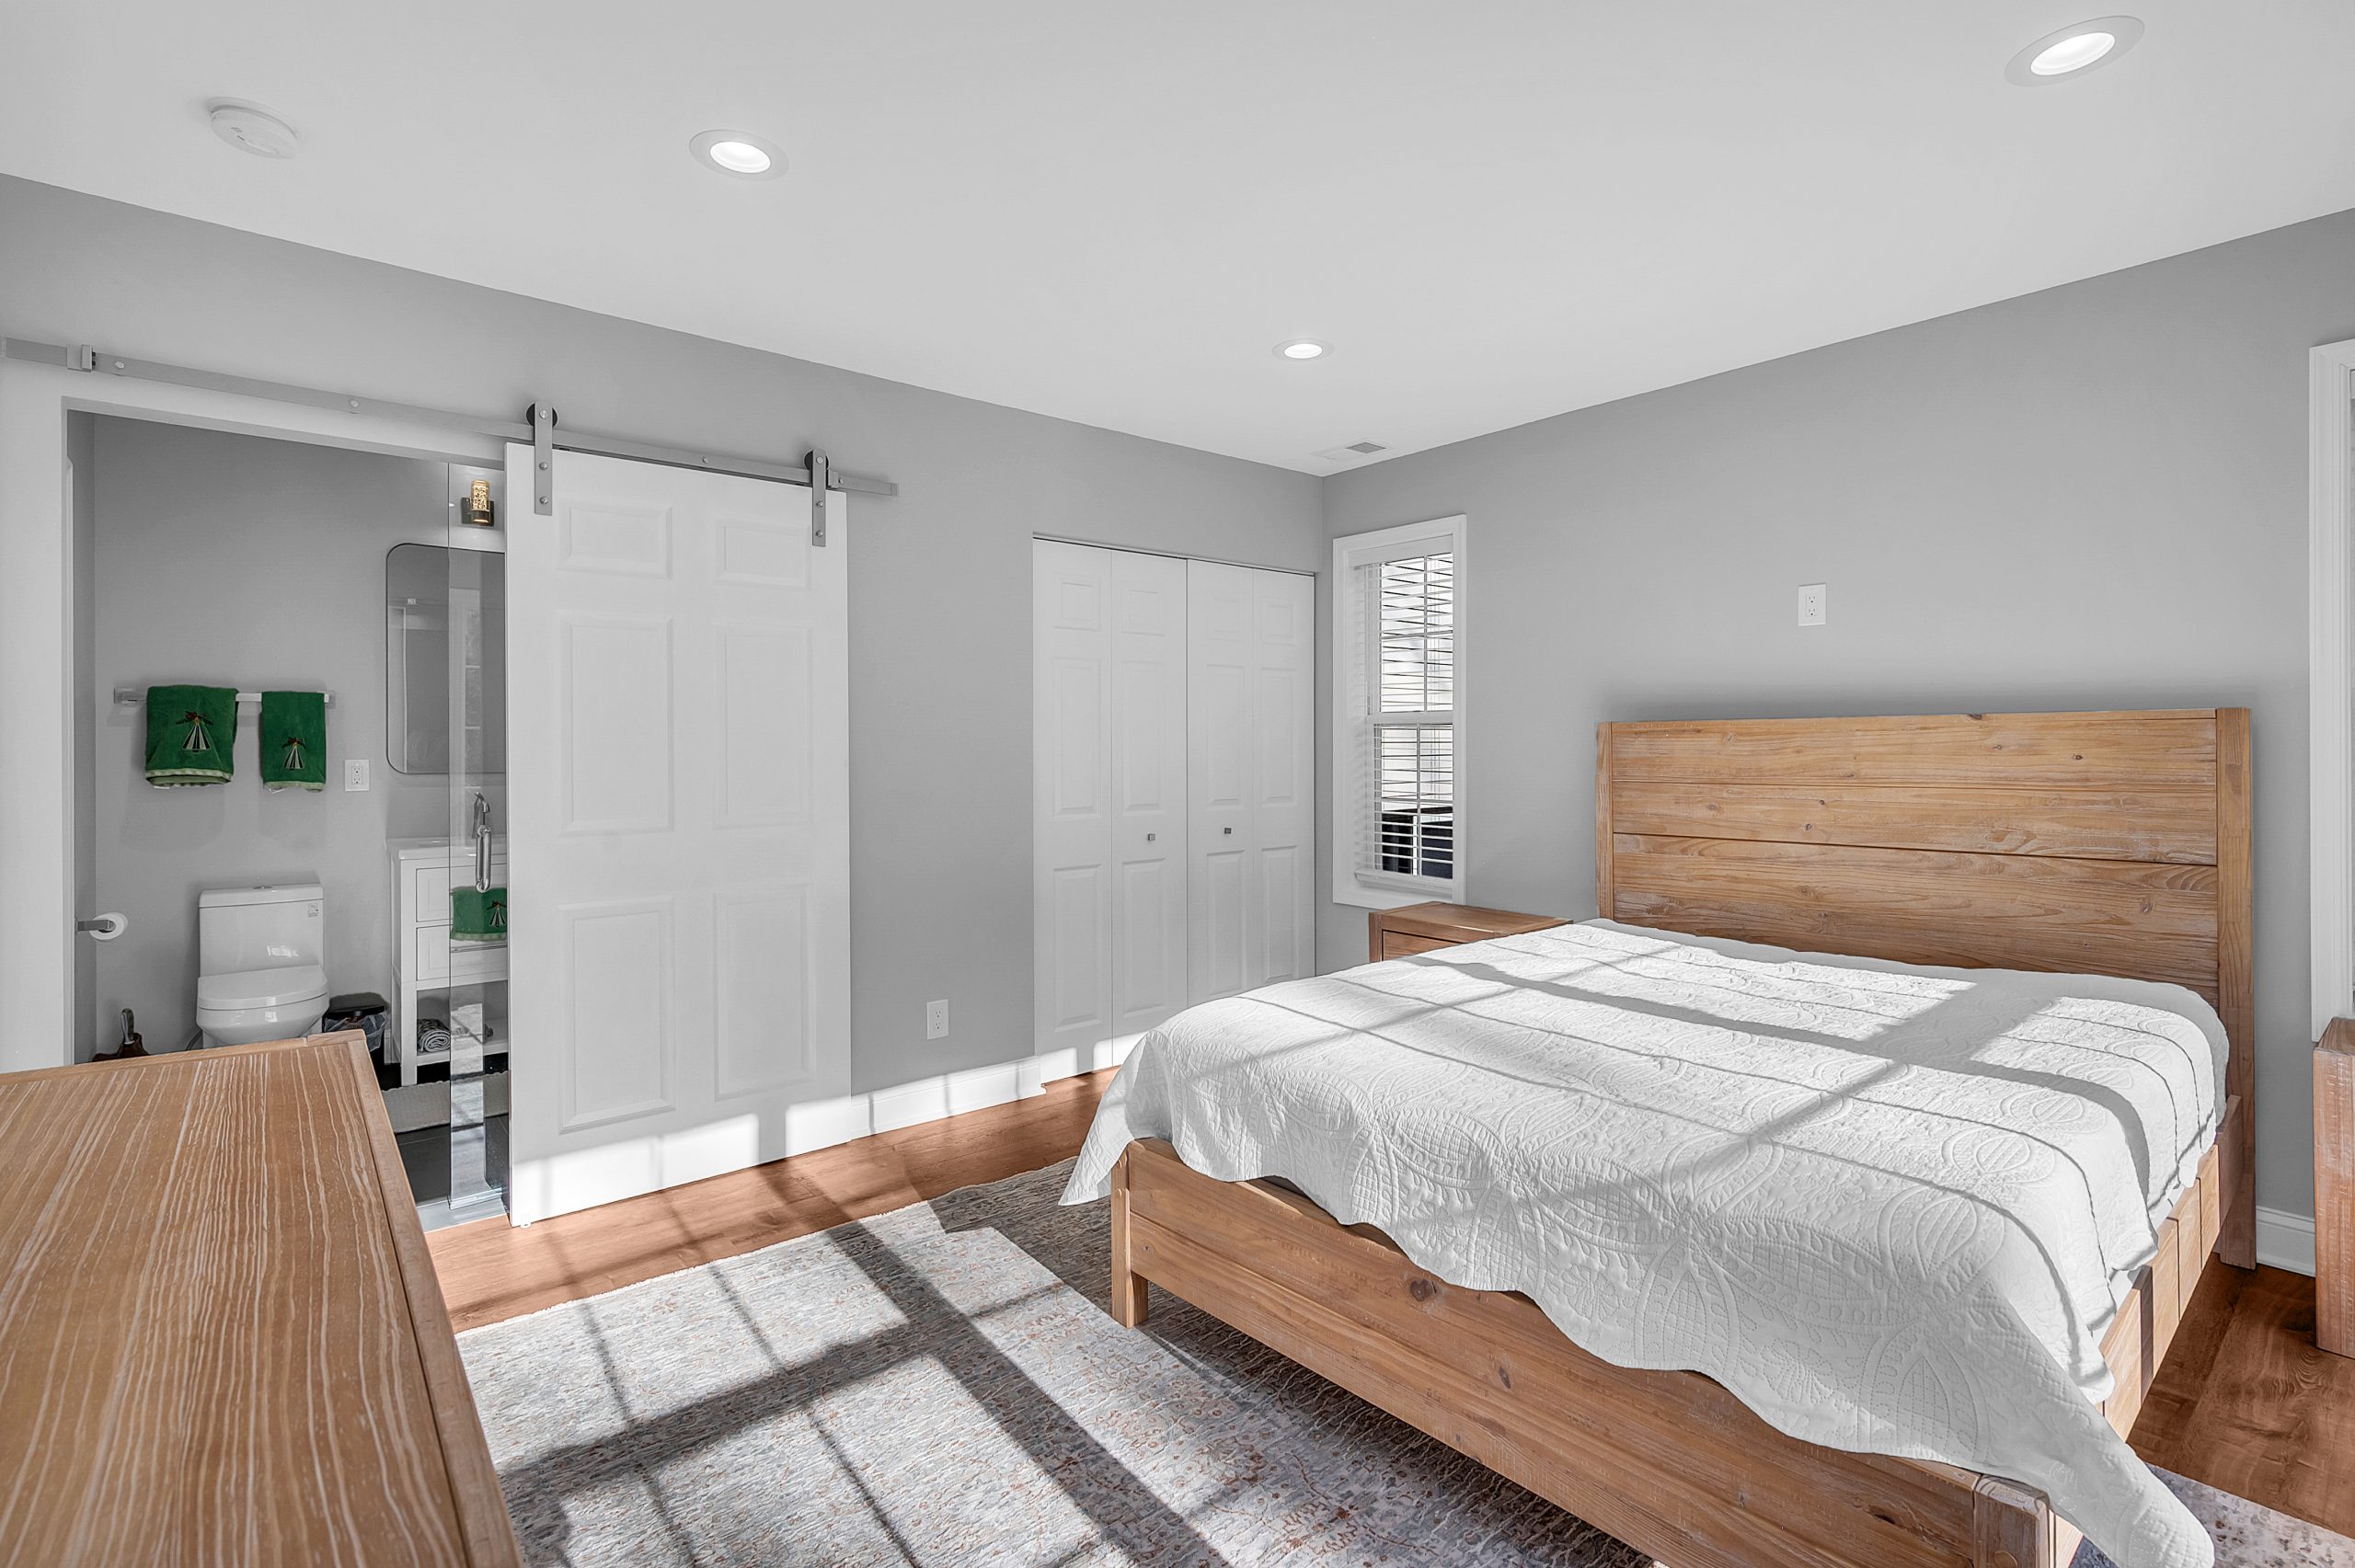 Bright and modern bedroom part of a room addition project in Fairfax, showcasing a wooden queen-sized bed with a crisp white quilt, polished hardwood floors, and a peek into the attached bathroom with green towels, all designed by Mosaic Design & Build